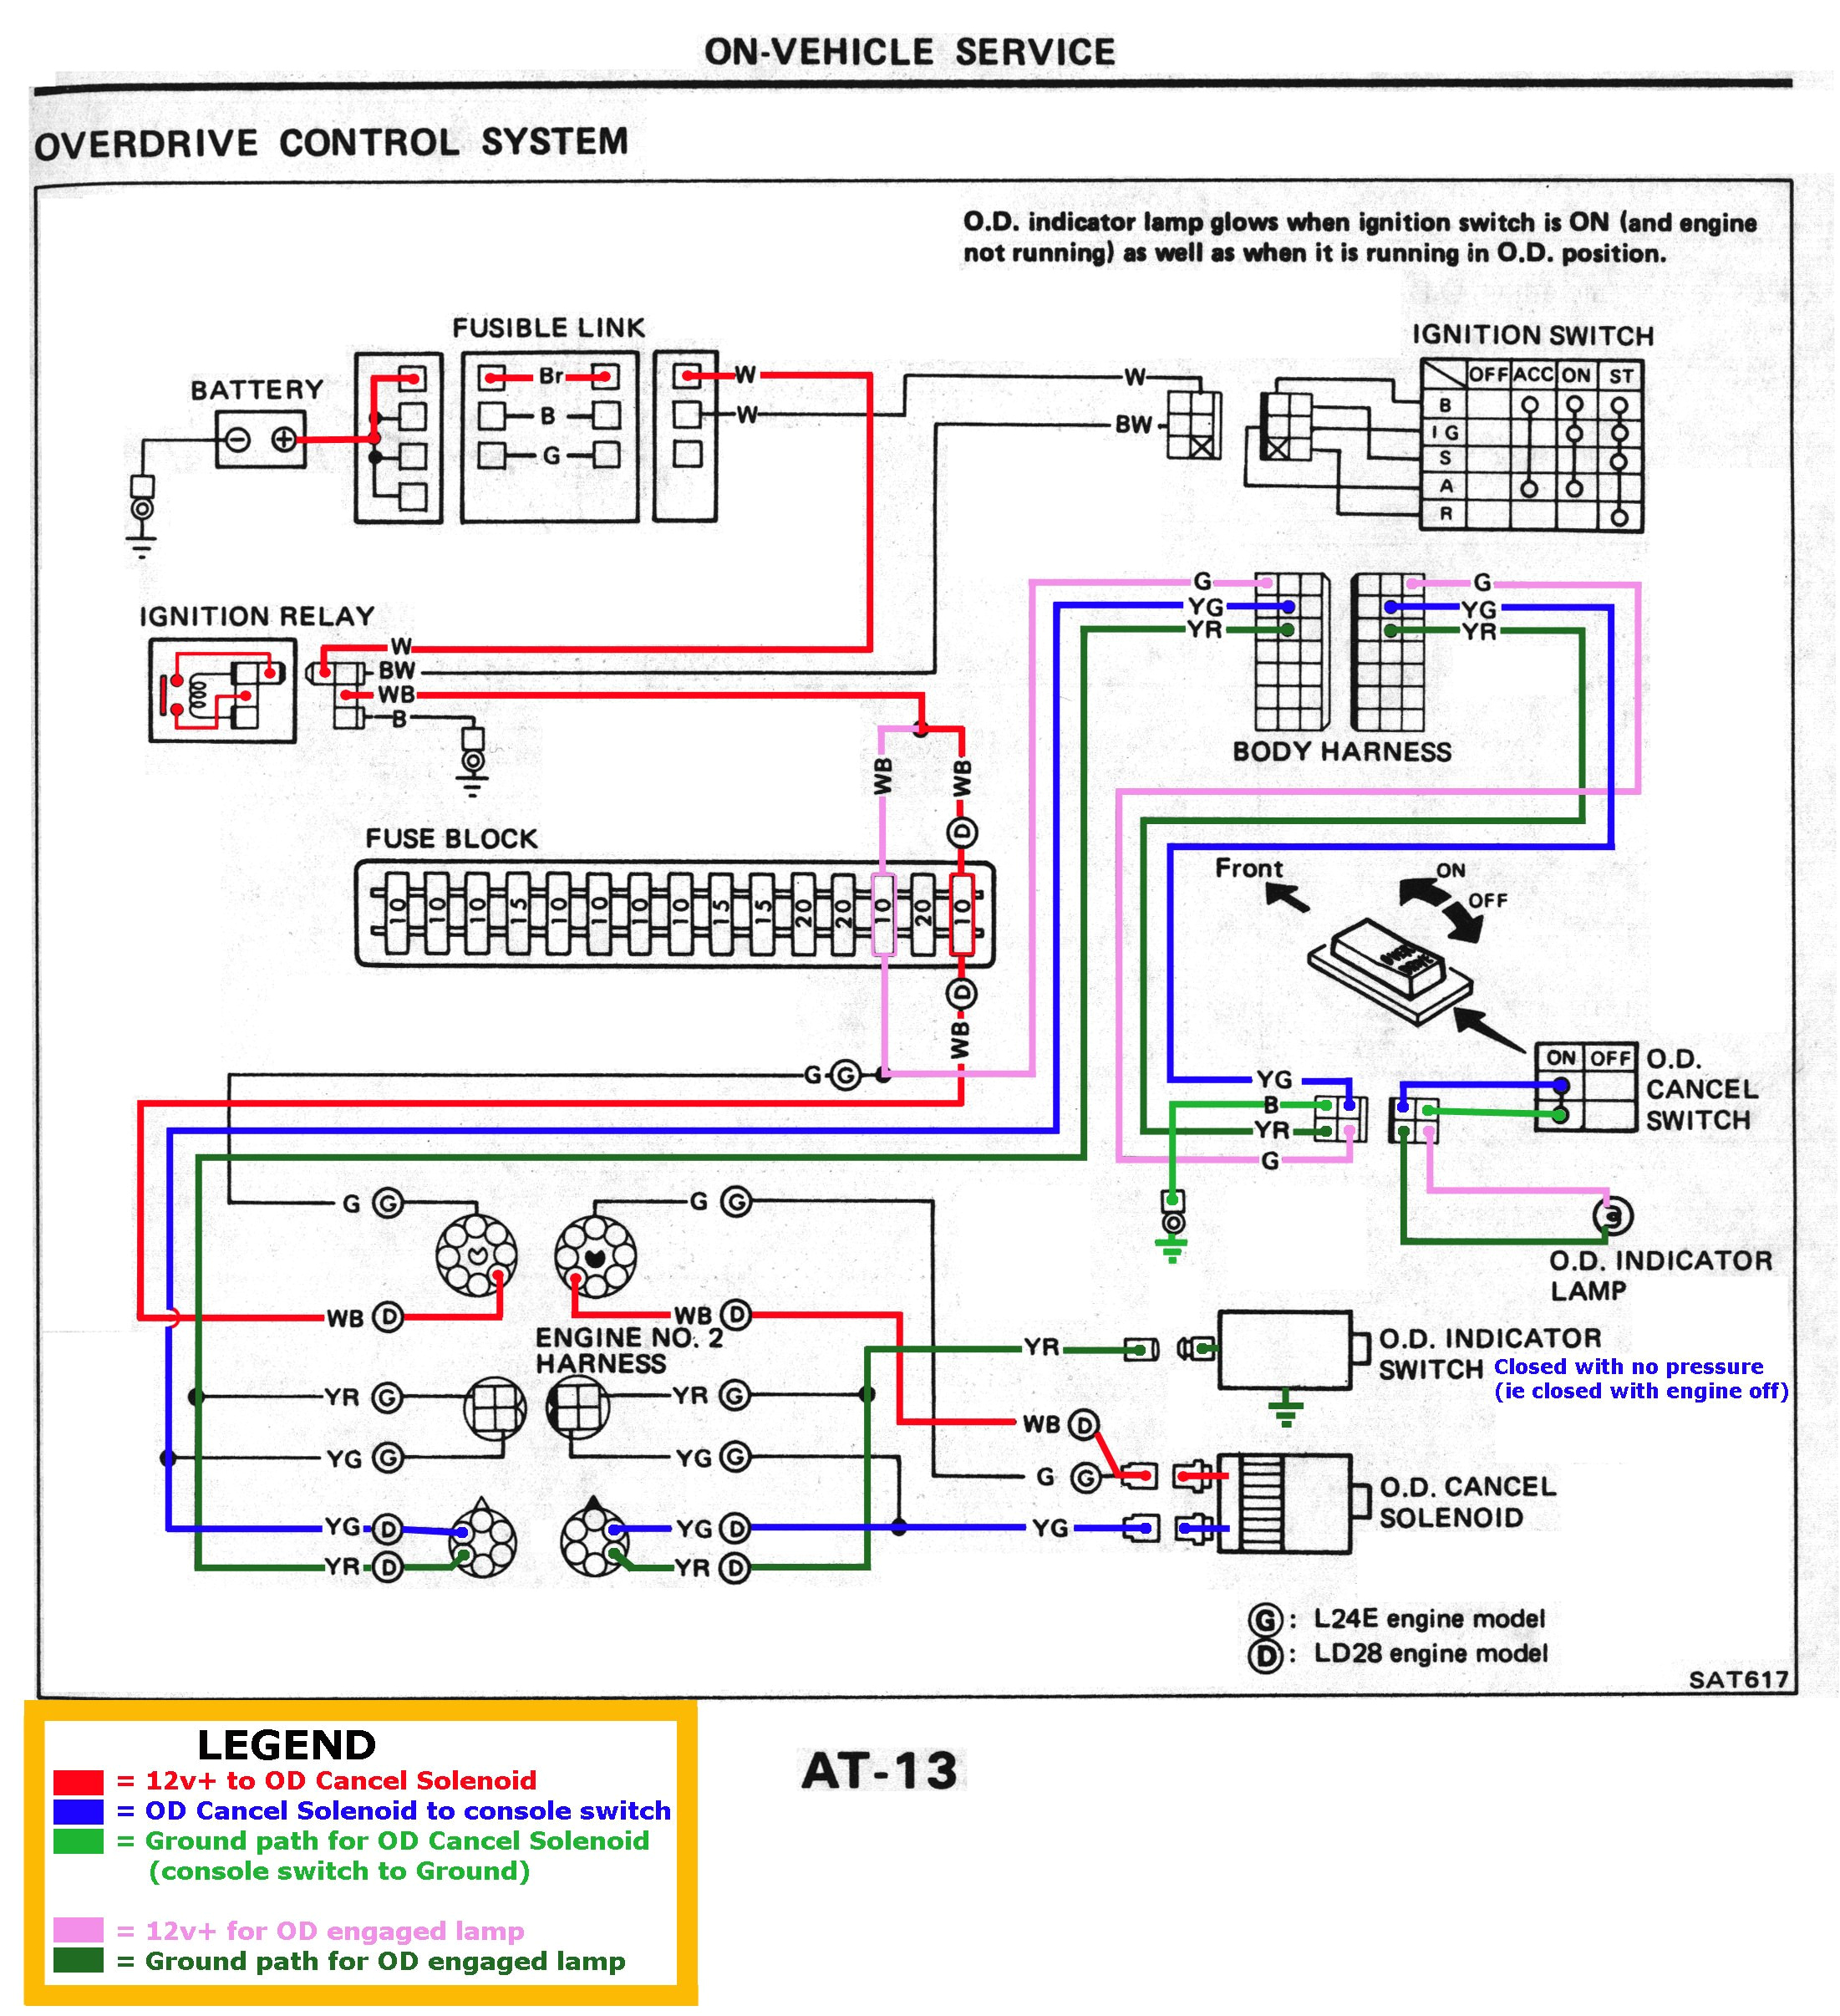 chinese wiring harness free download another blog about wiring diagram free download wiring harness